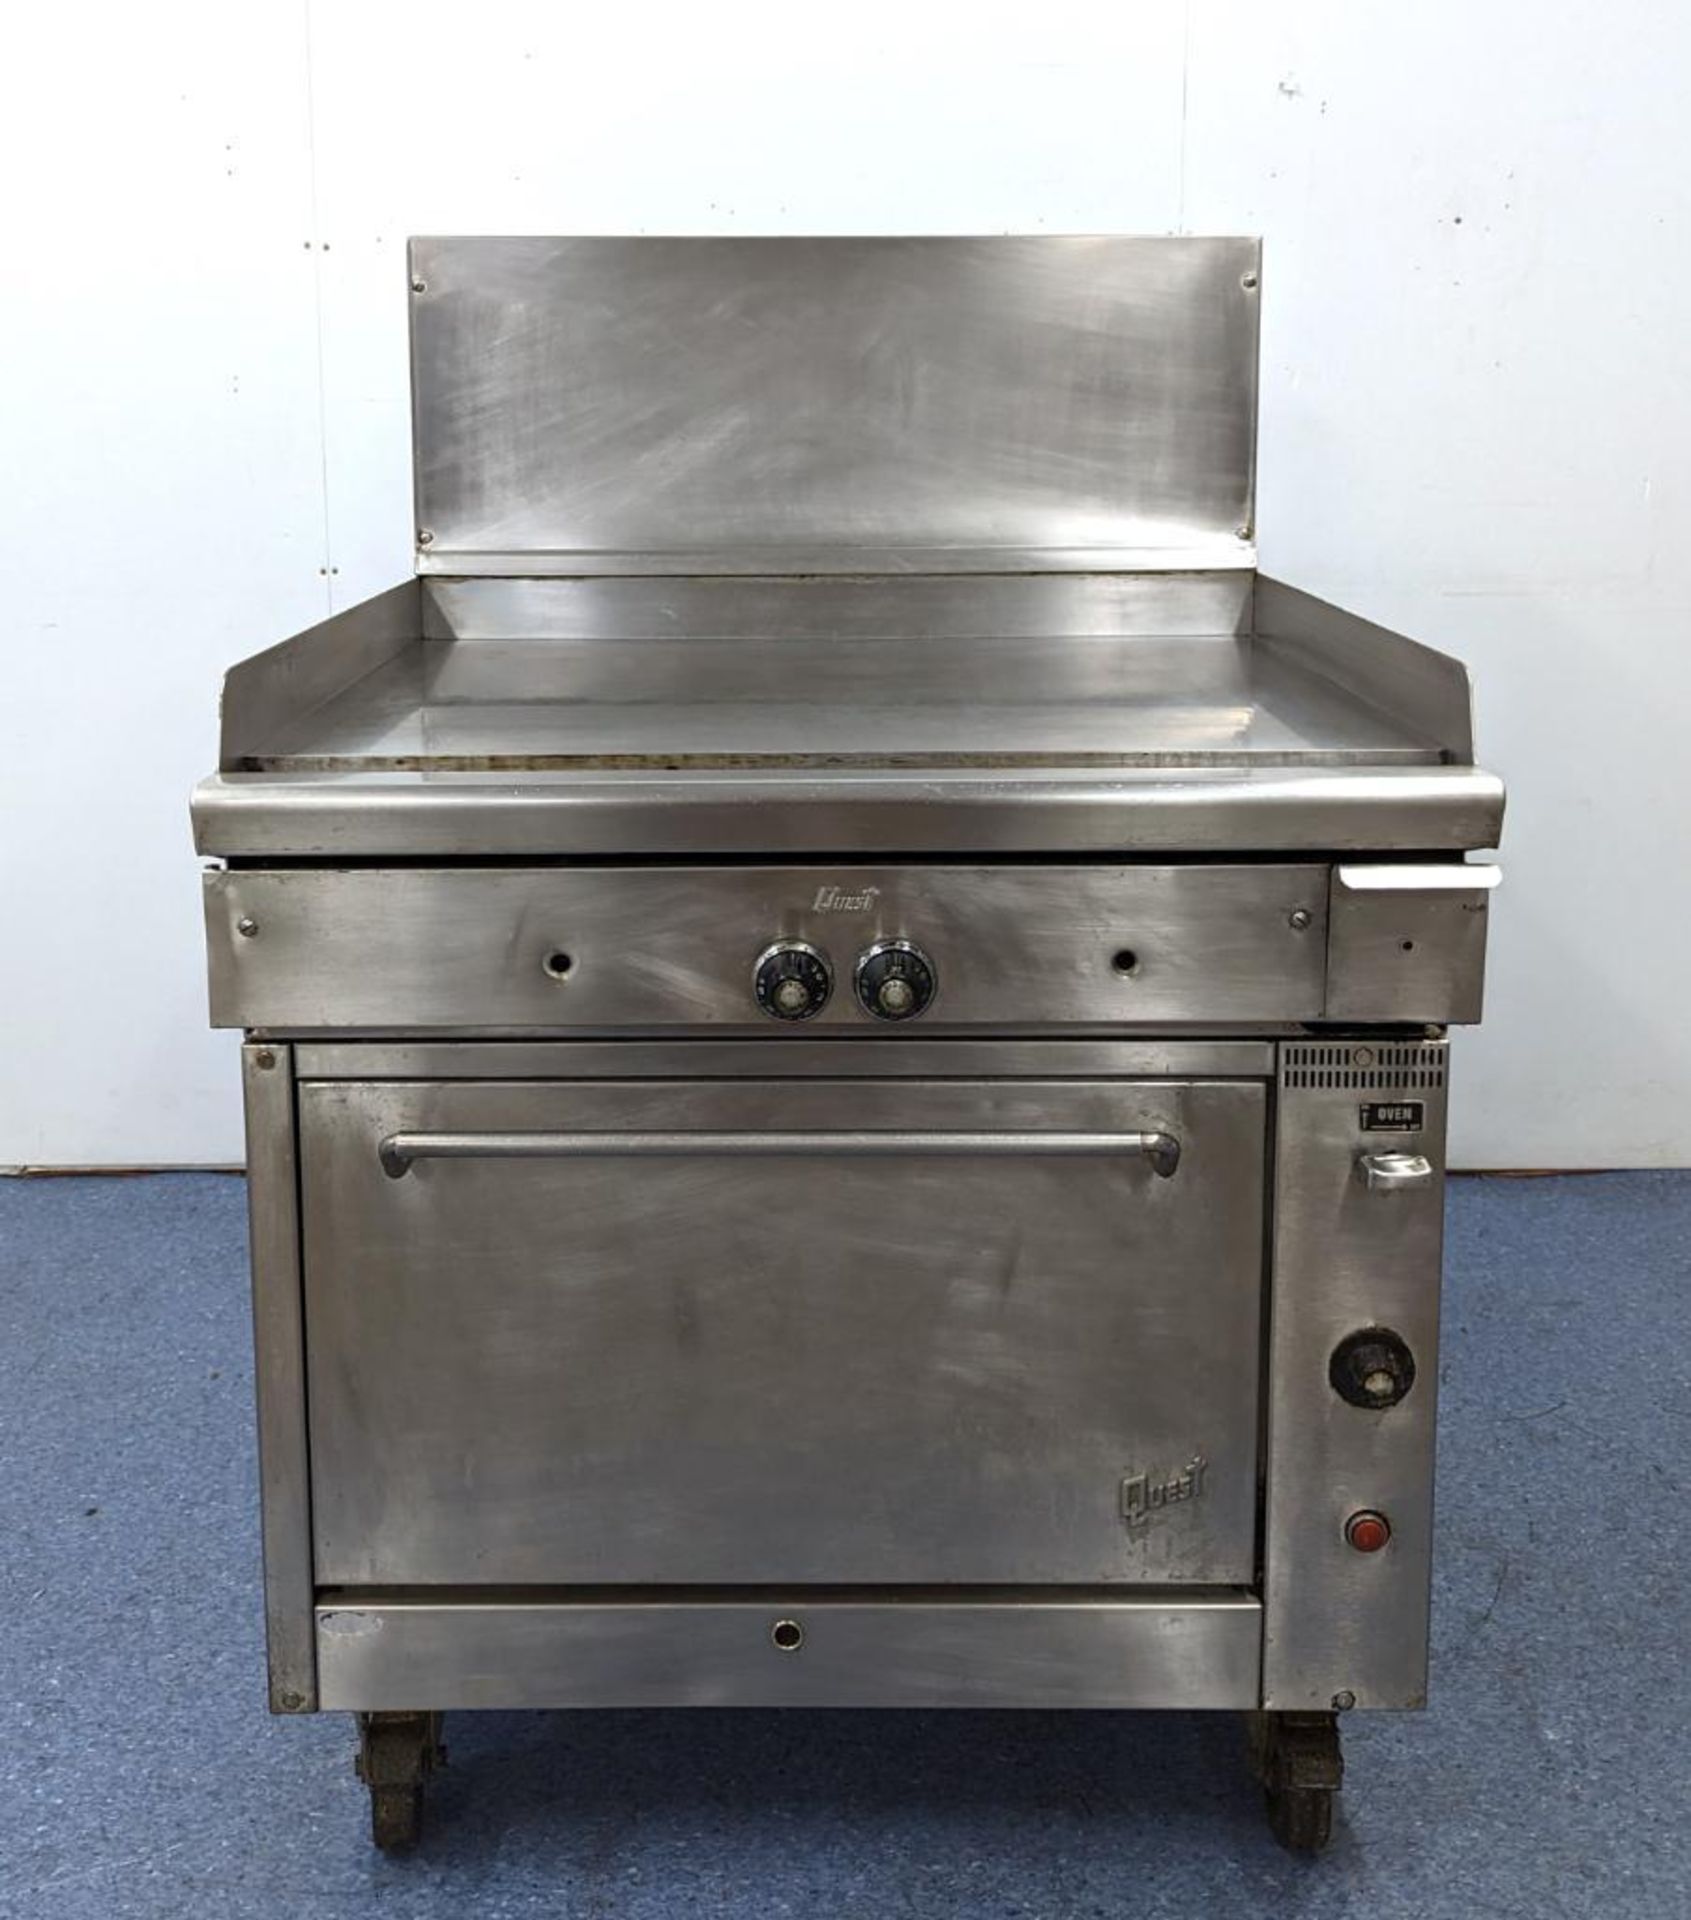 QUEST QGR-1 SERIES NATURAL GAS SINGLE OVEN RANGE WITH 36" GRIDDLE - Image 3 of 11